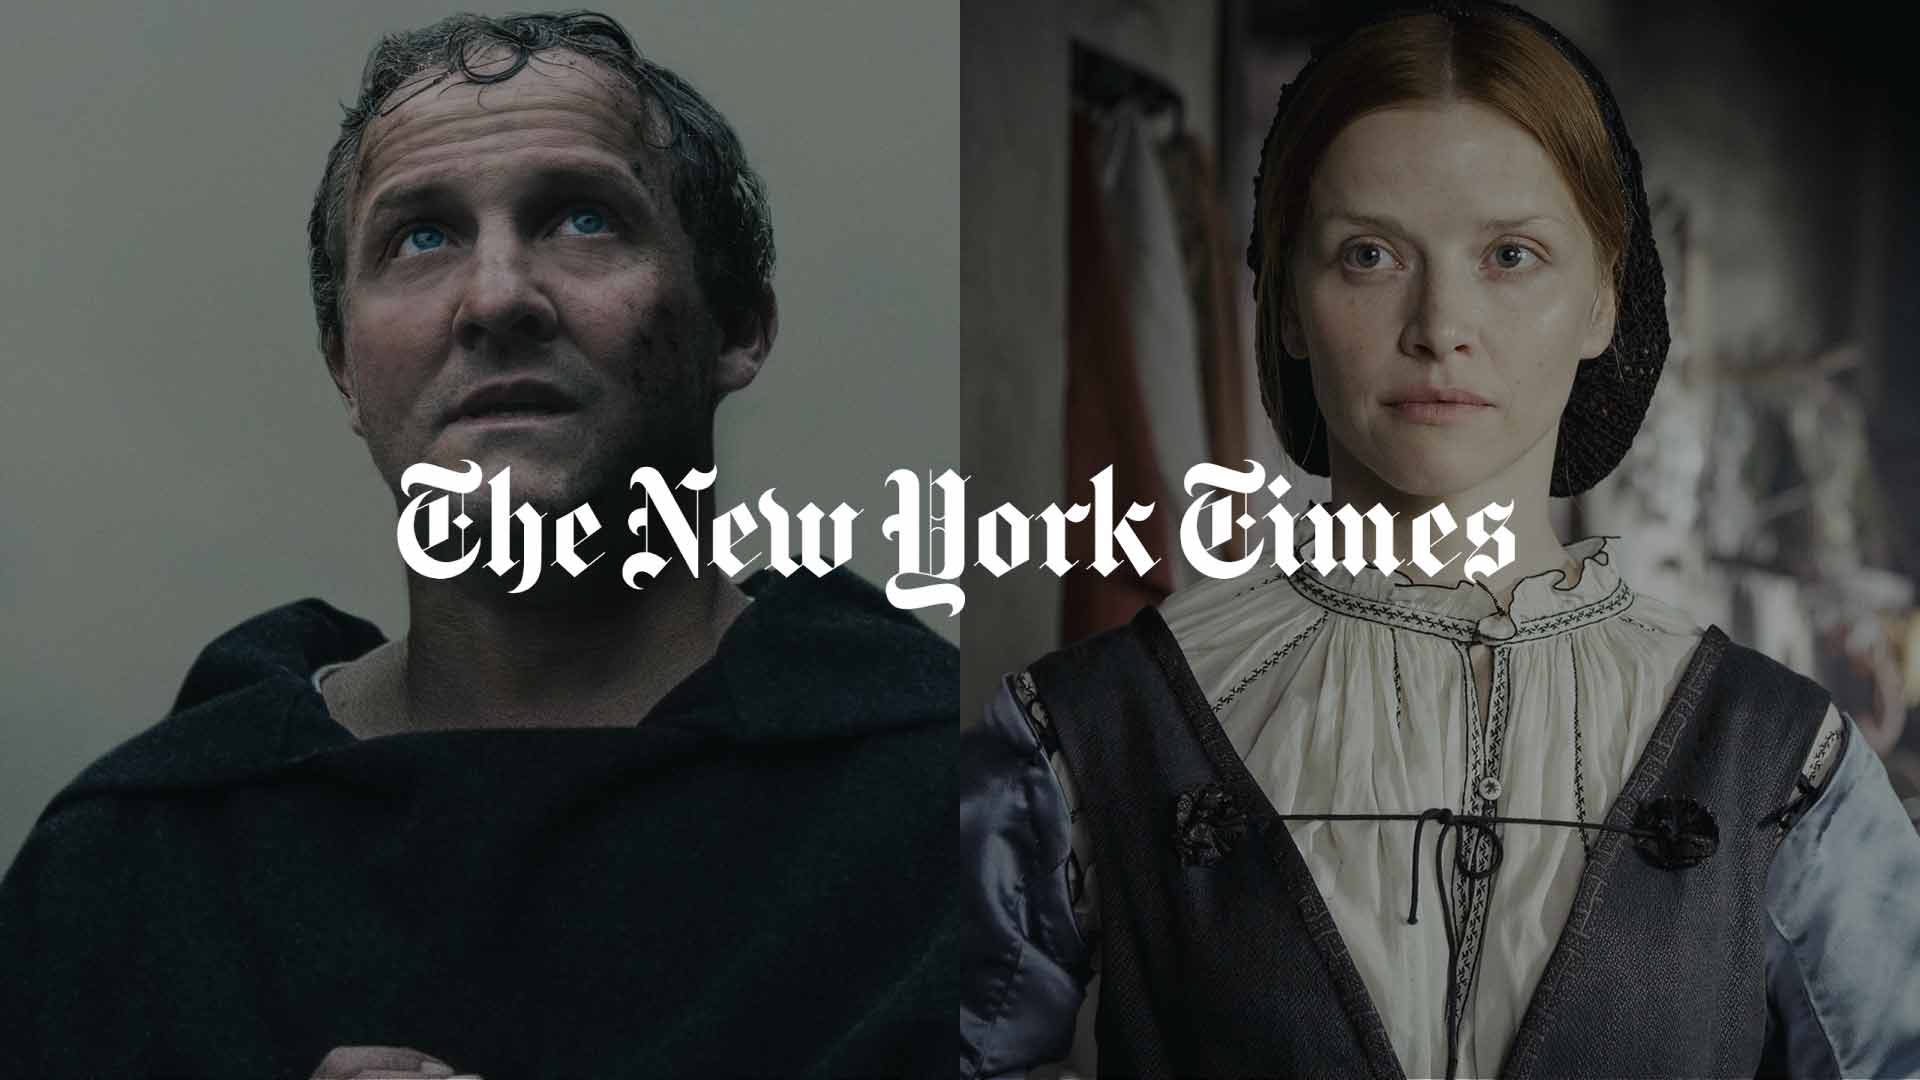 reformation luther and i ny times promo 4 1920x1080